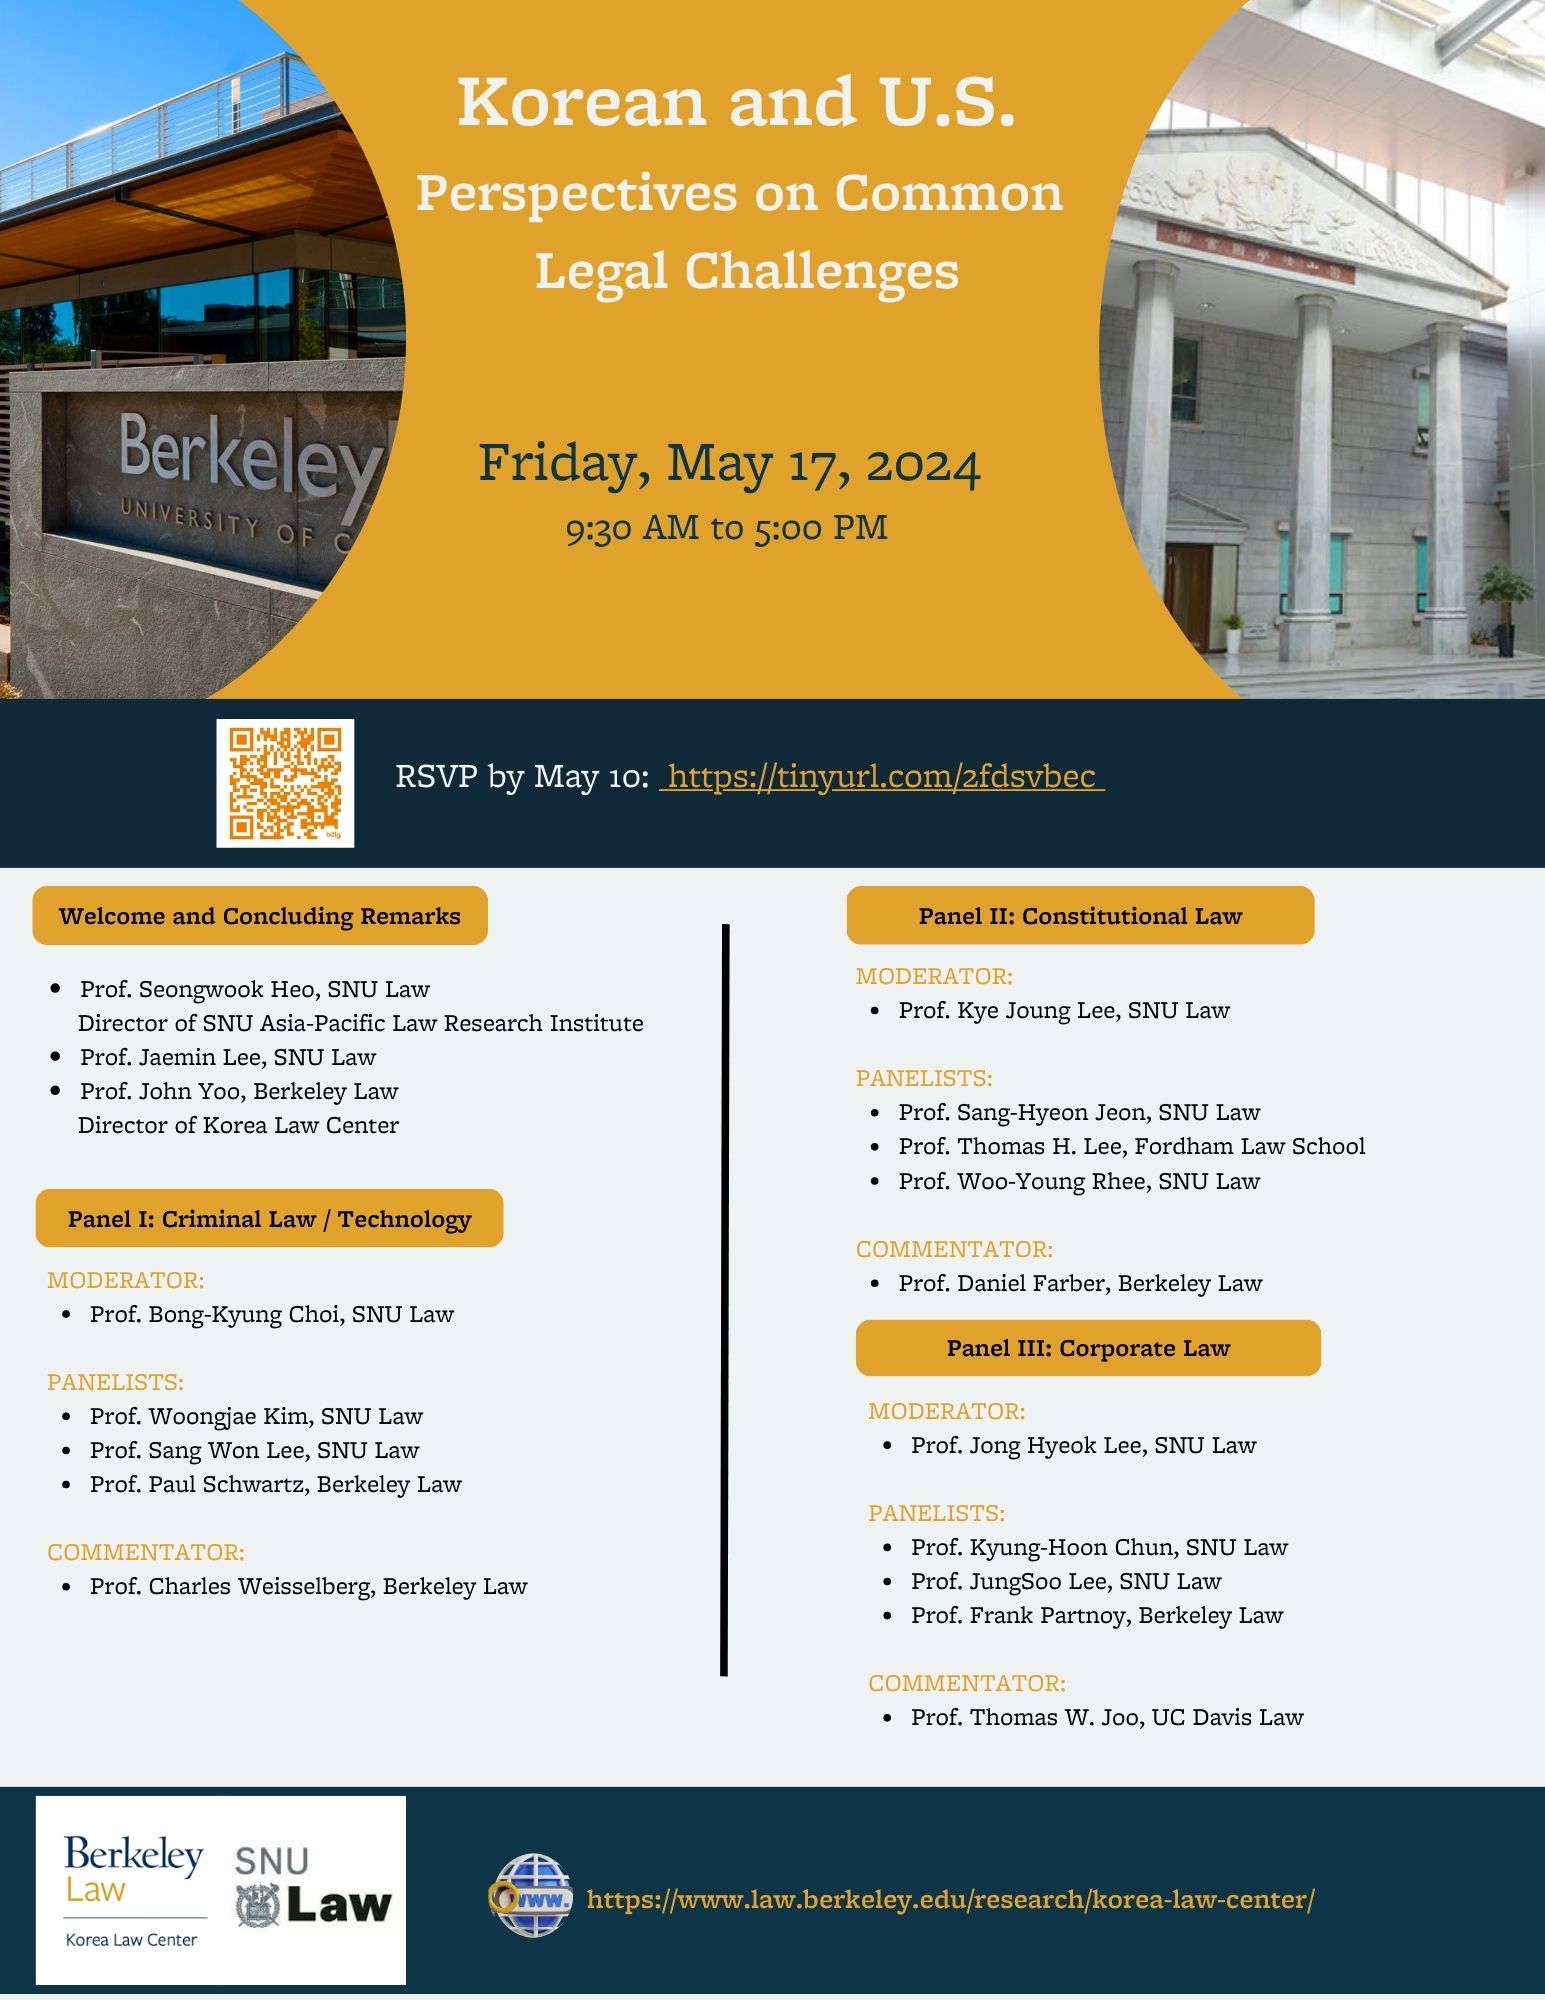 korean and U.S. perspectives on common legal challenges; friday may 17th from 9:30-5